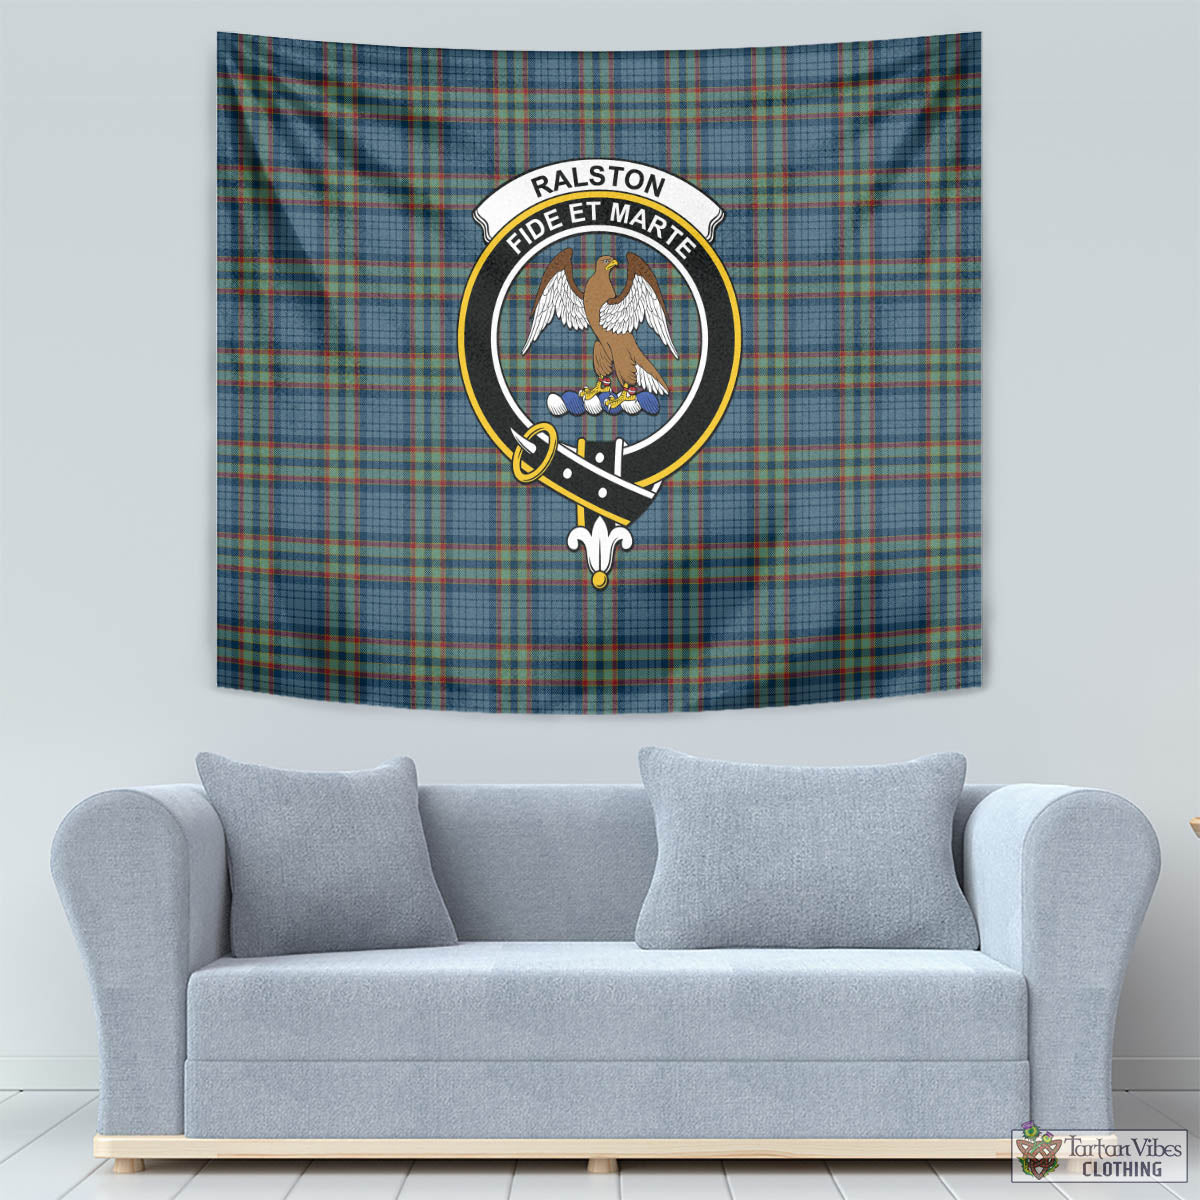 Tartan Vibes Clothing Ralston UK Tartan Tapestry Wall Hanging and Home Decor for Room with Family Crest